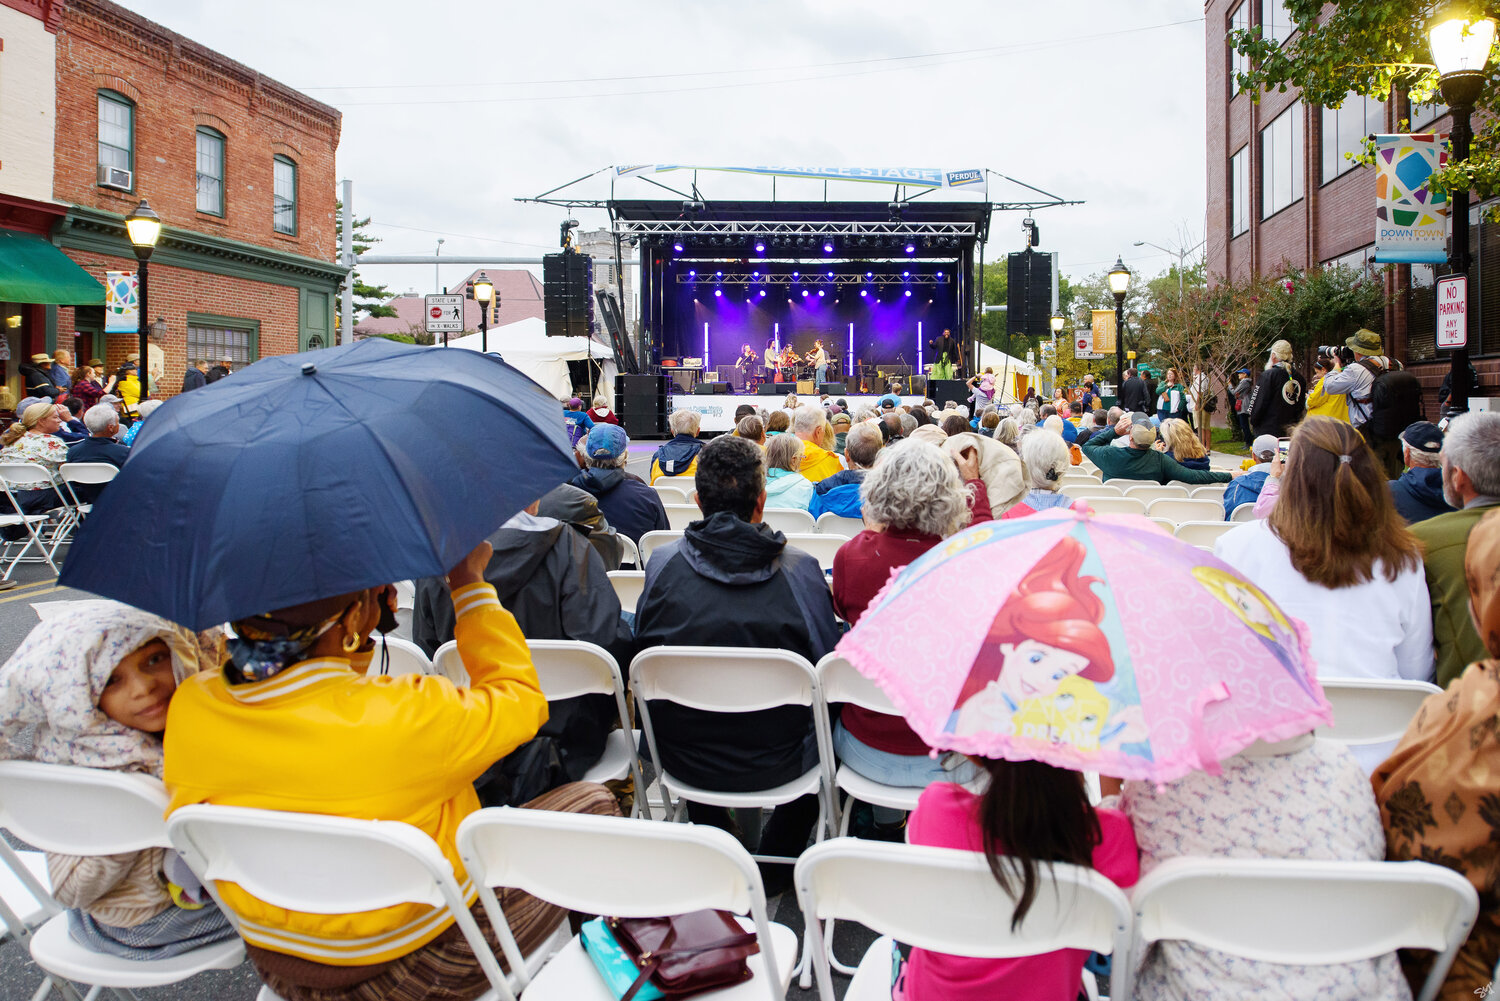 Rain hampered the opening performances of Friday's Maryland Folk Festival opening in Downtown Salisbury. Saturday's events were a washout, thanks to Tropical Storm Ophelia, but the event continued Sunday.